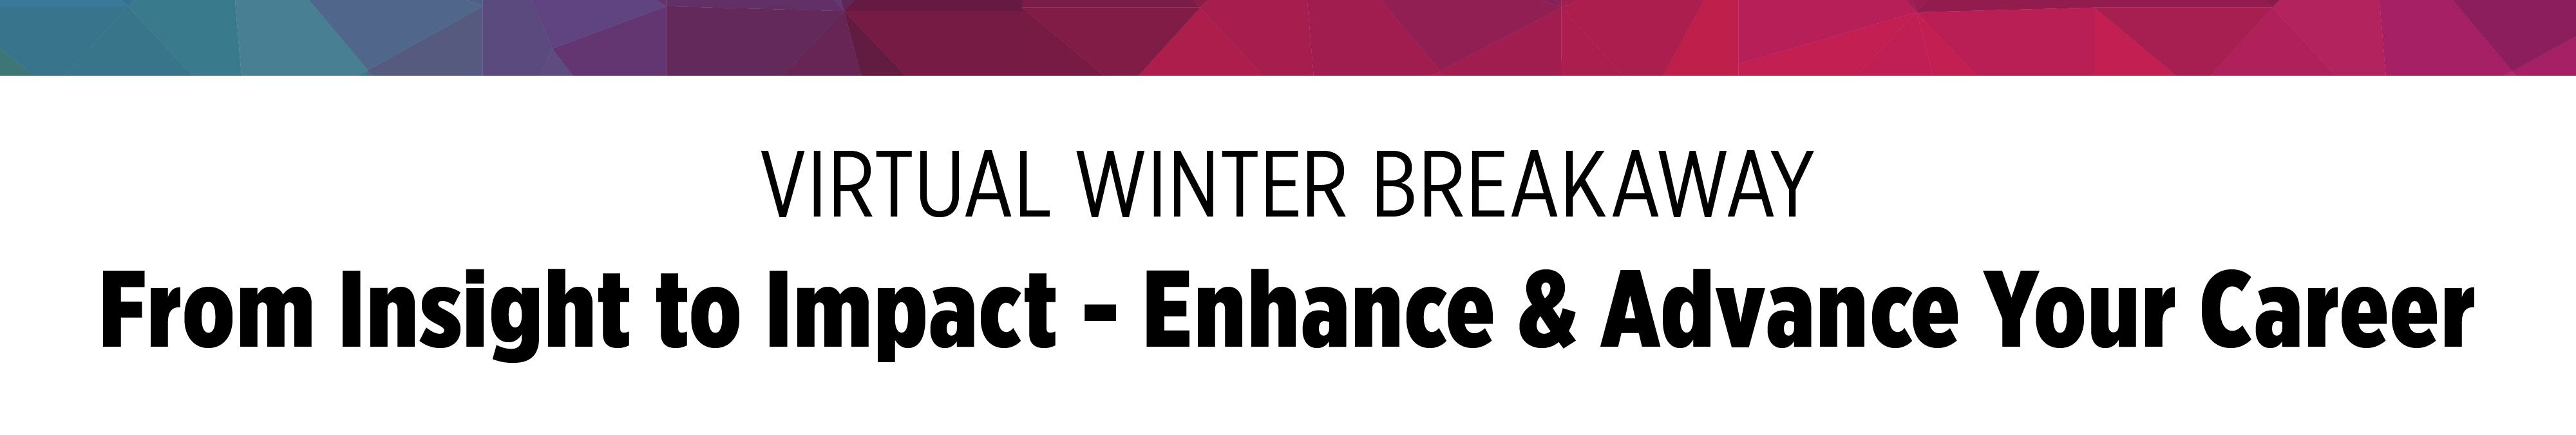 Virtual Winter Breakaway - From Insight to Impact - Enhance & Advance Your Career